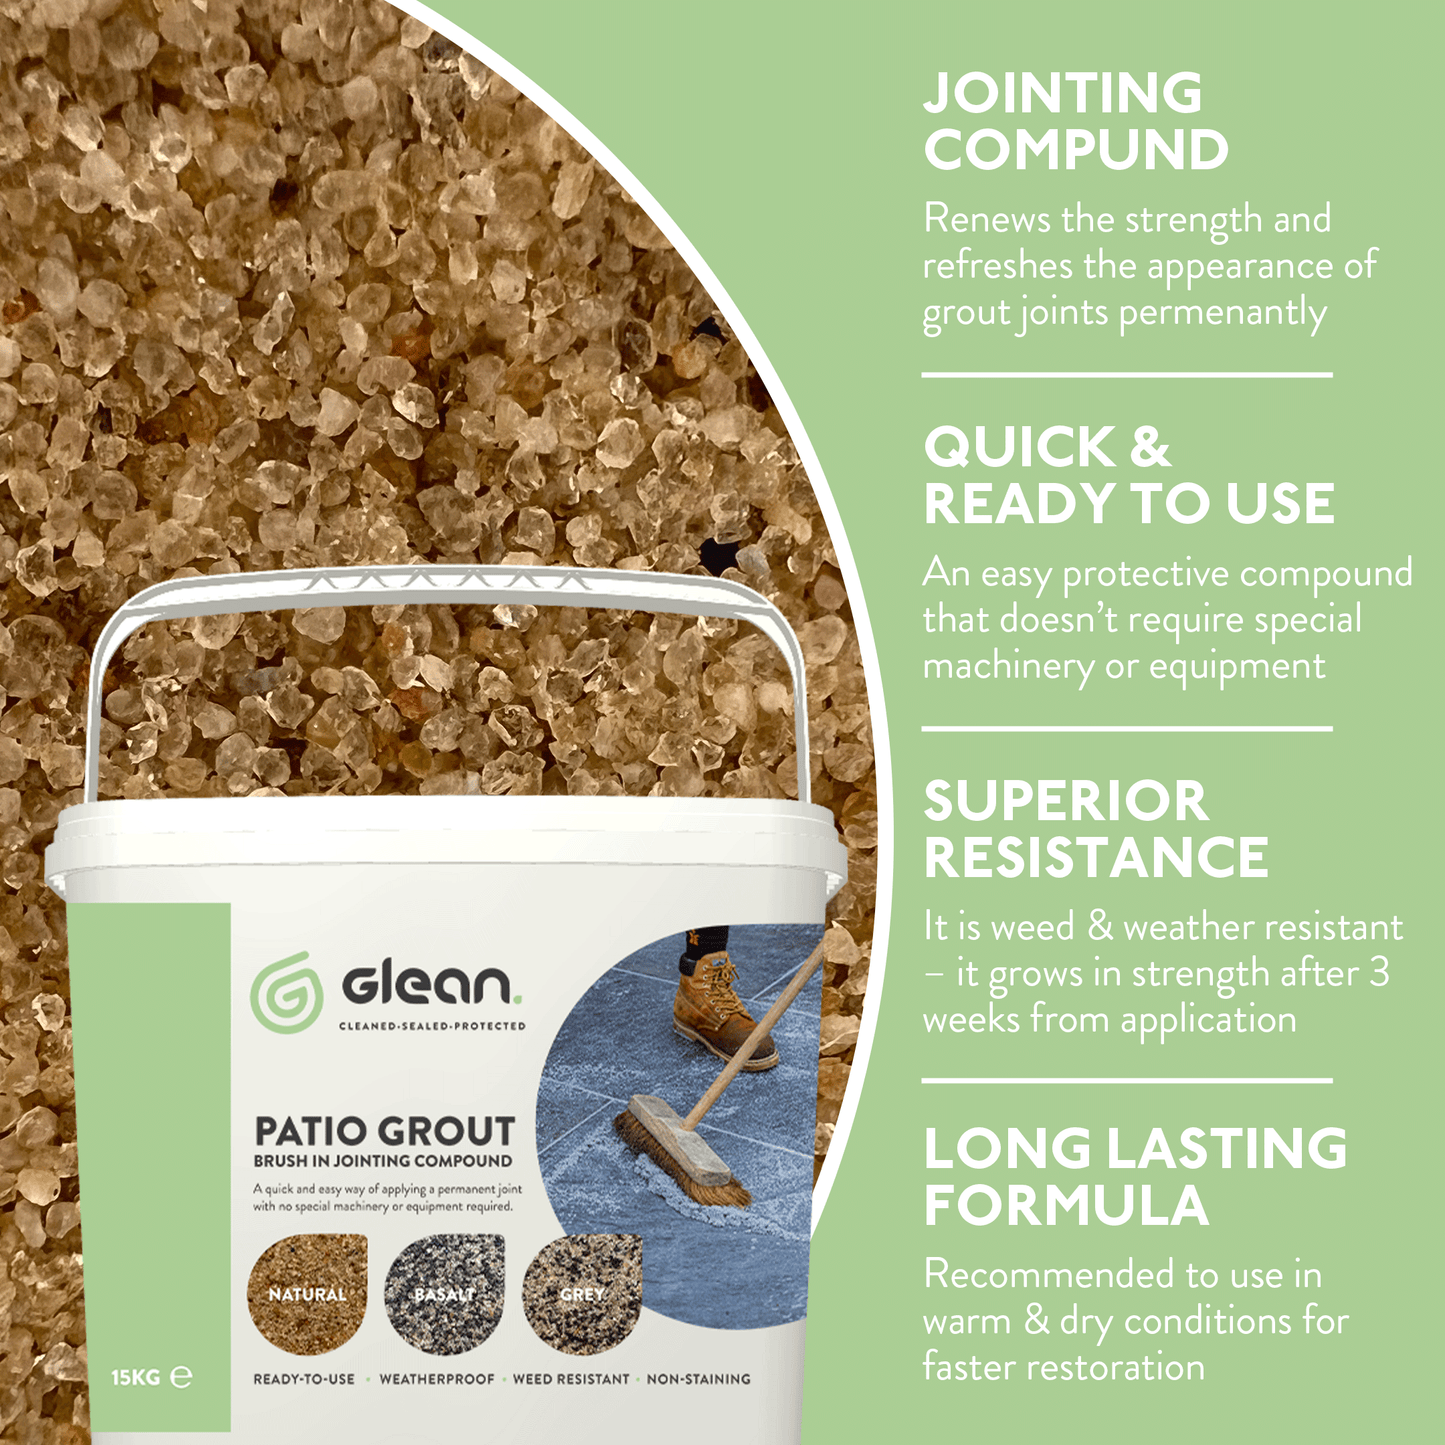 Patio Grout - Brush In Jointing Compound | GLEAN